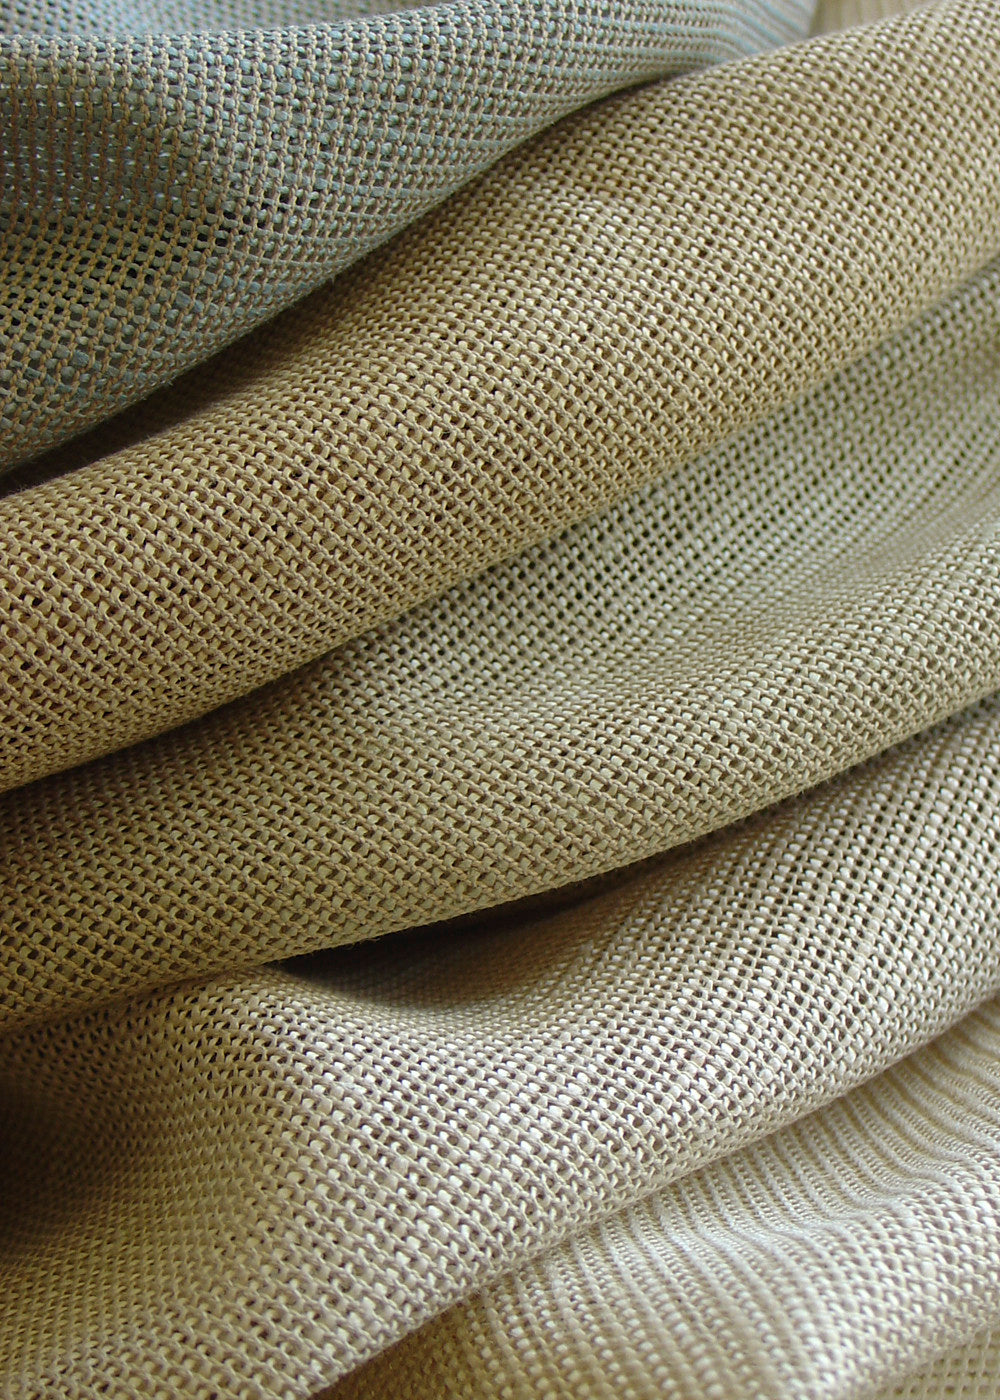 a stack of open-weave linen fabrics in different colors